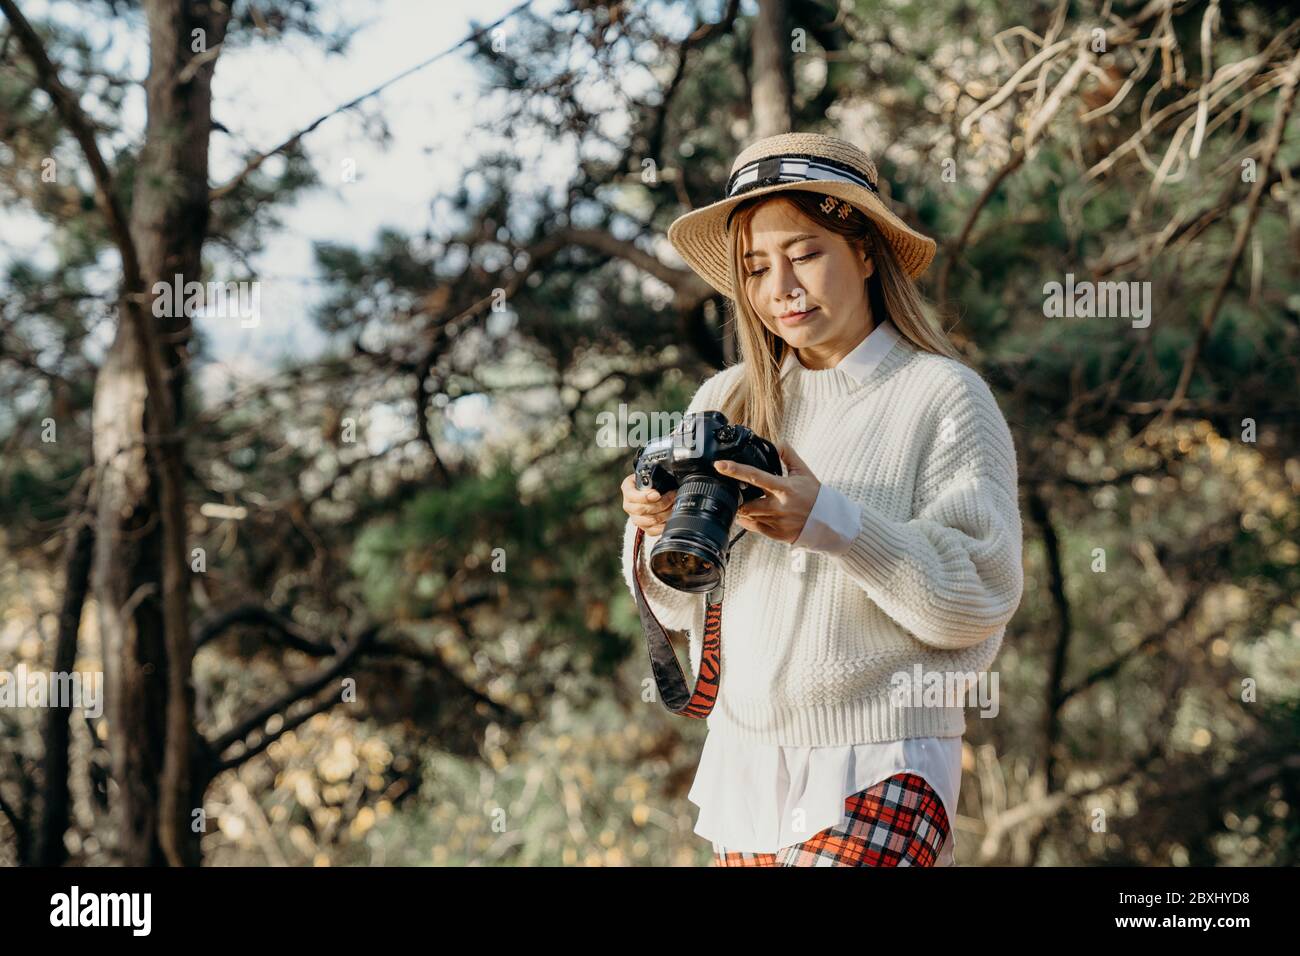 Asian woman photographer enjoys taking pictures with the pine forest nature. Stock Photo